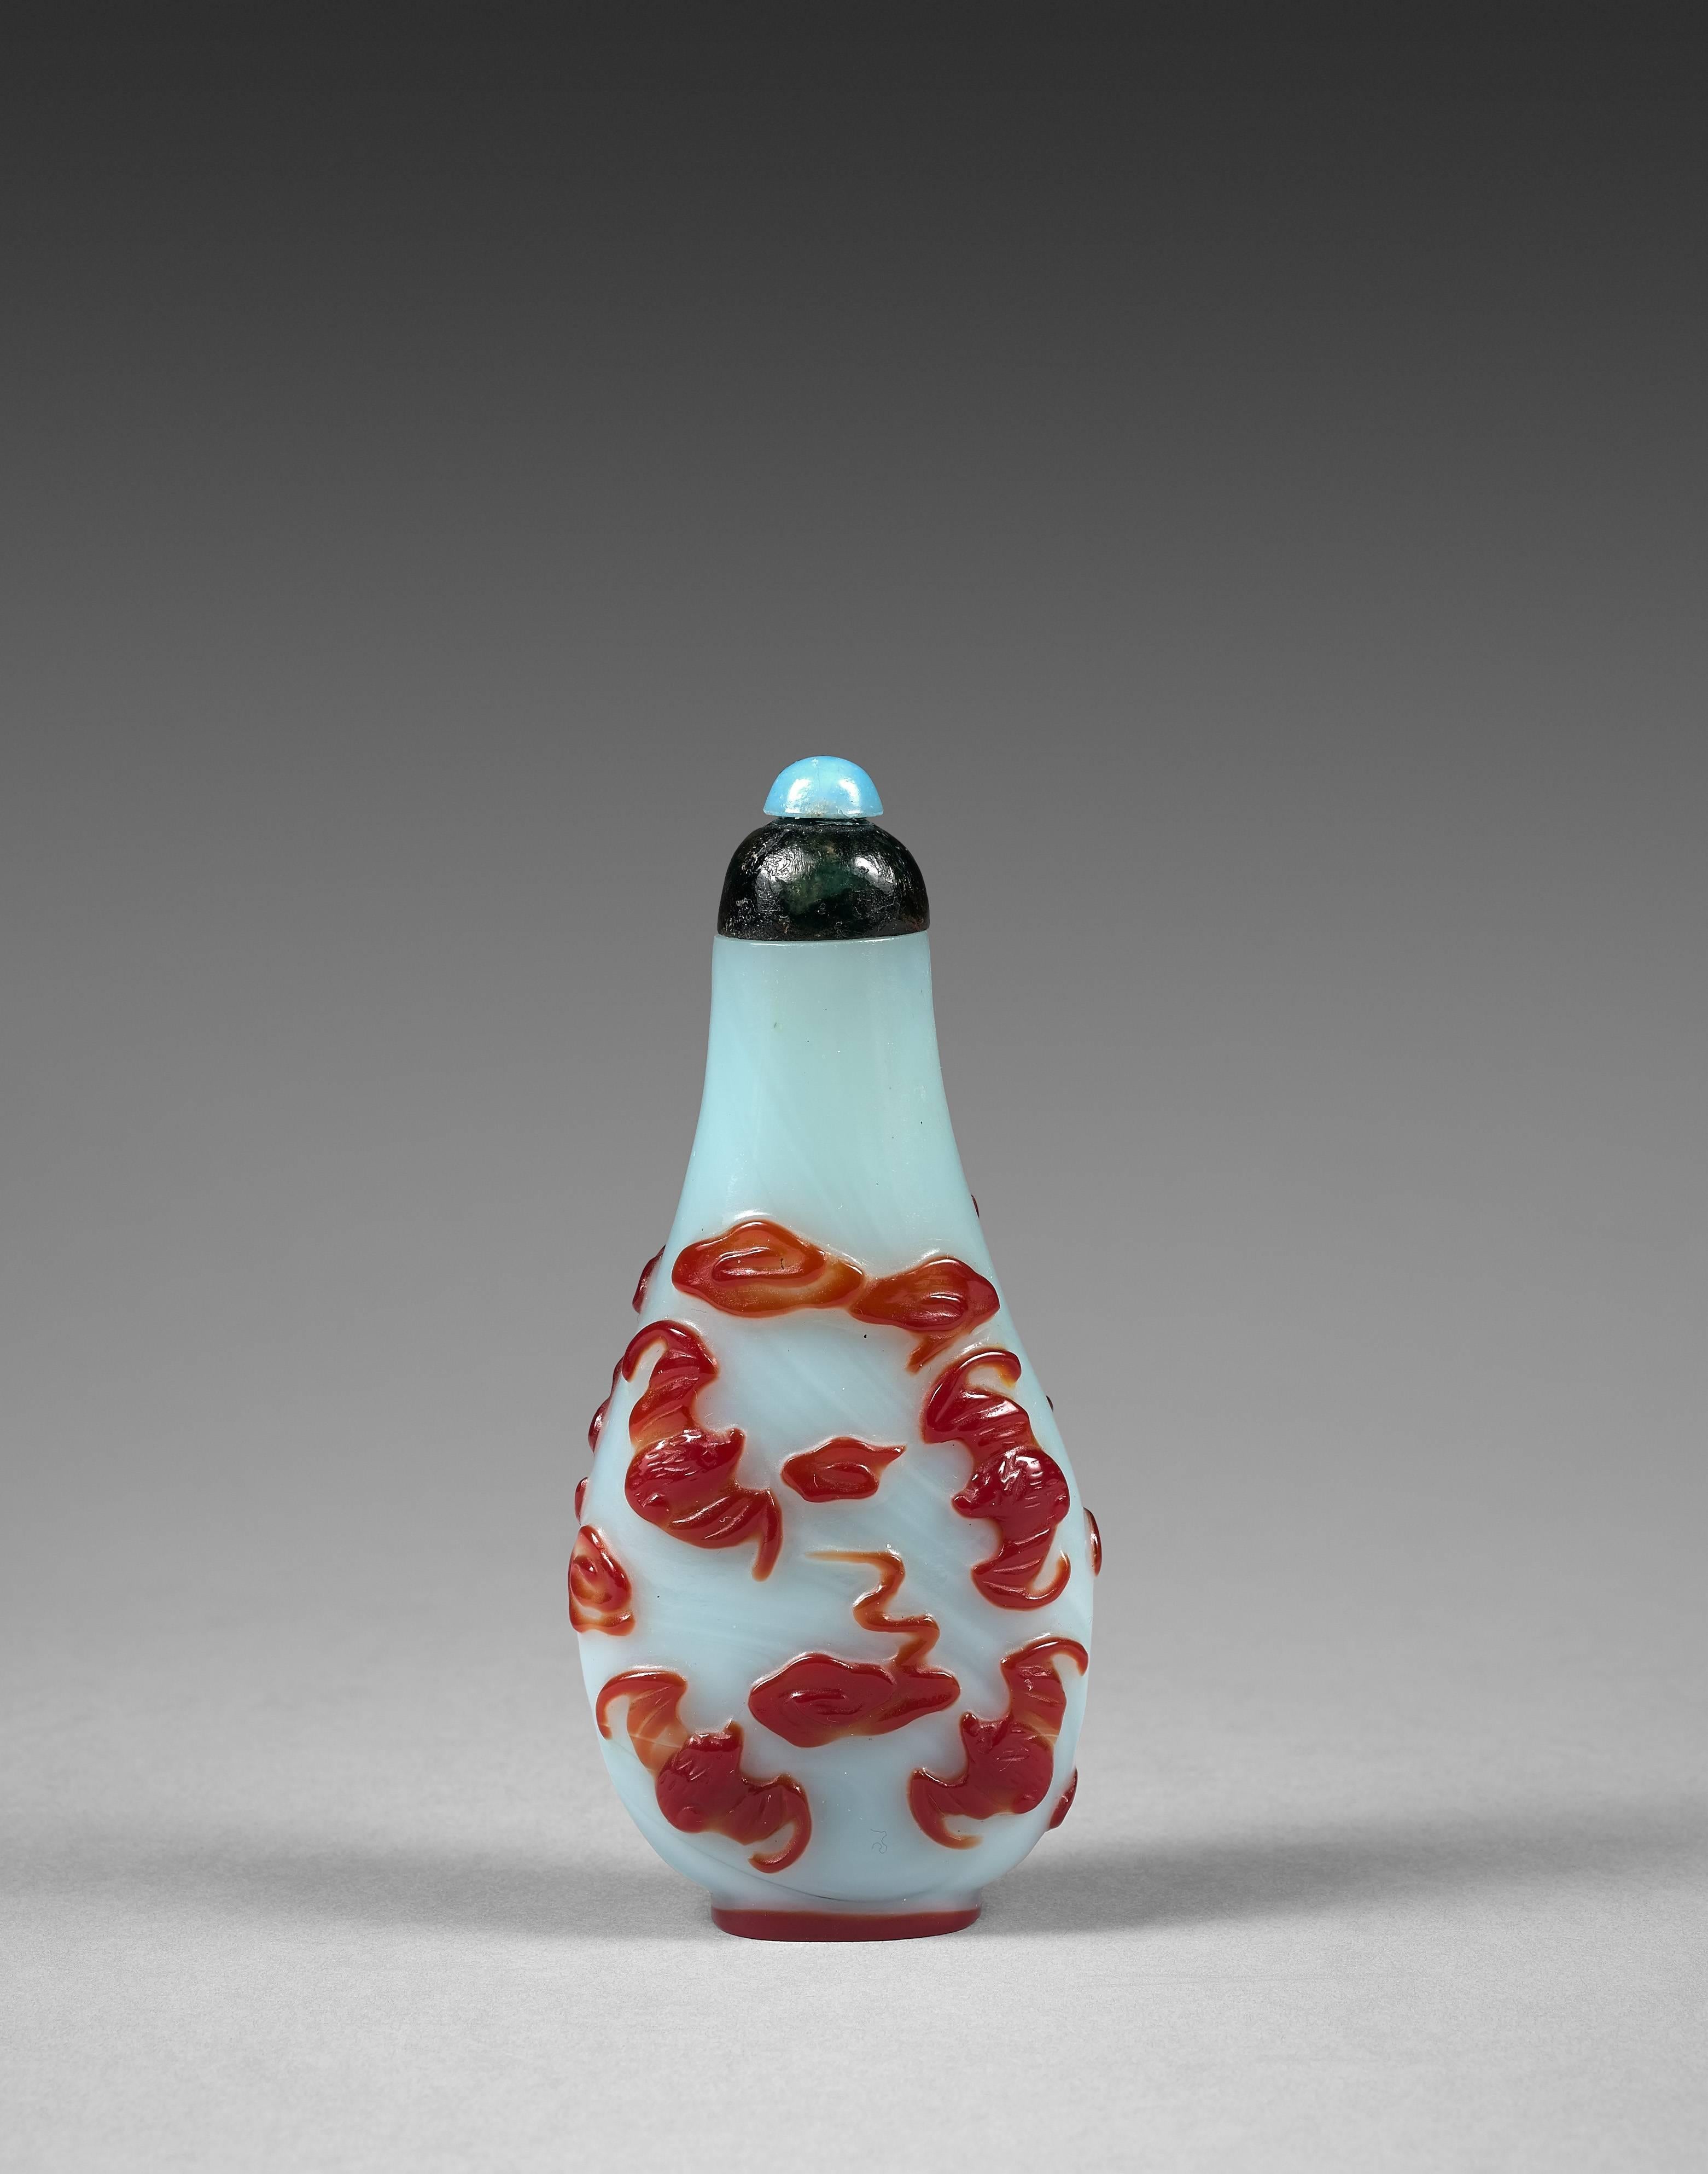 The snuffbottle with an elongated body, surmounted by a high collar ending in a small two-tone cap. The body decorated with bats flying among the clouds in red overlay glass.

Provenance: Private French collection.